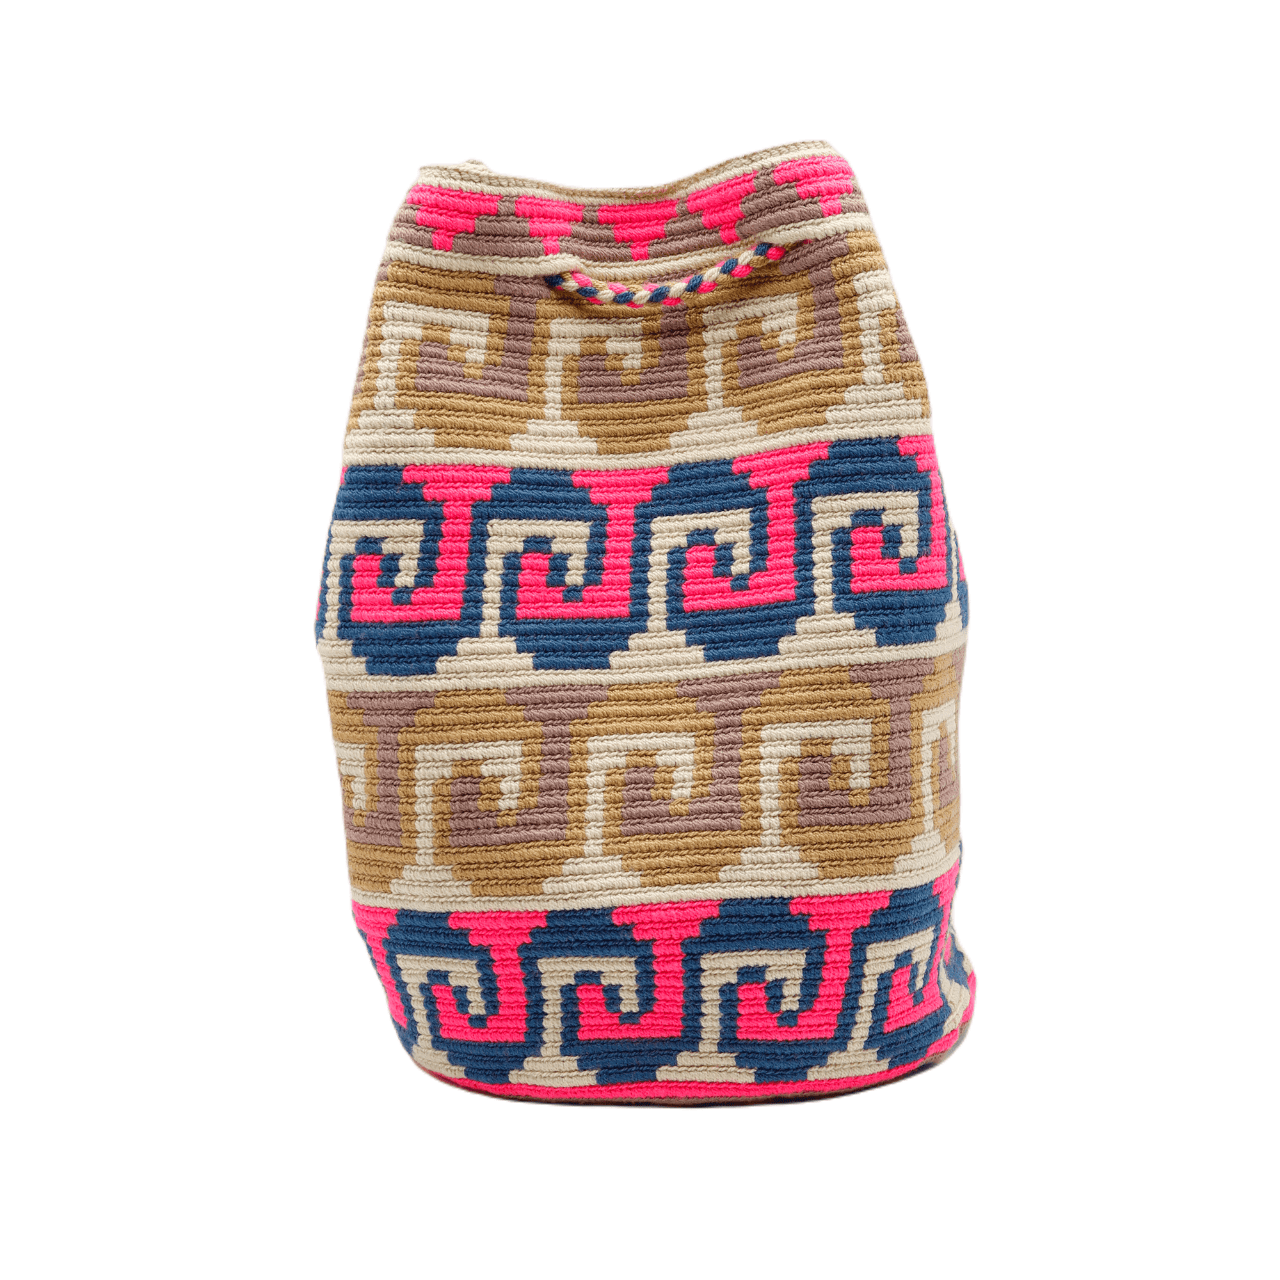 Shop the stylish Camilla Wayuu Bag featuring shades of beige, blue, and pink. This bag is the perfect everyday companion, providing ample space to carry all your essentials with ease and in fashionable style.